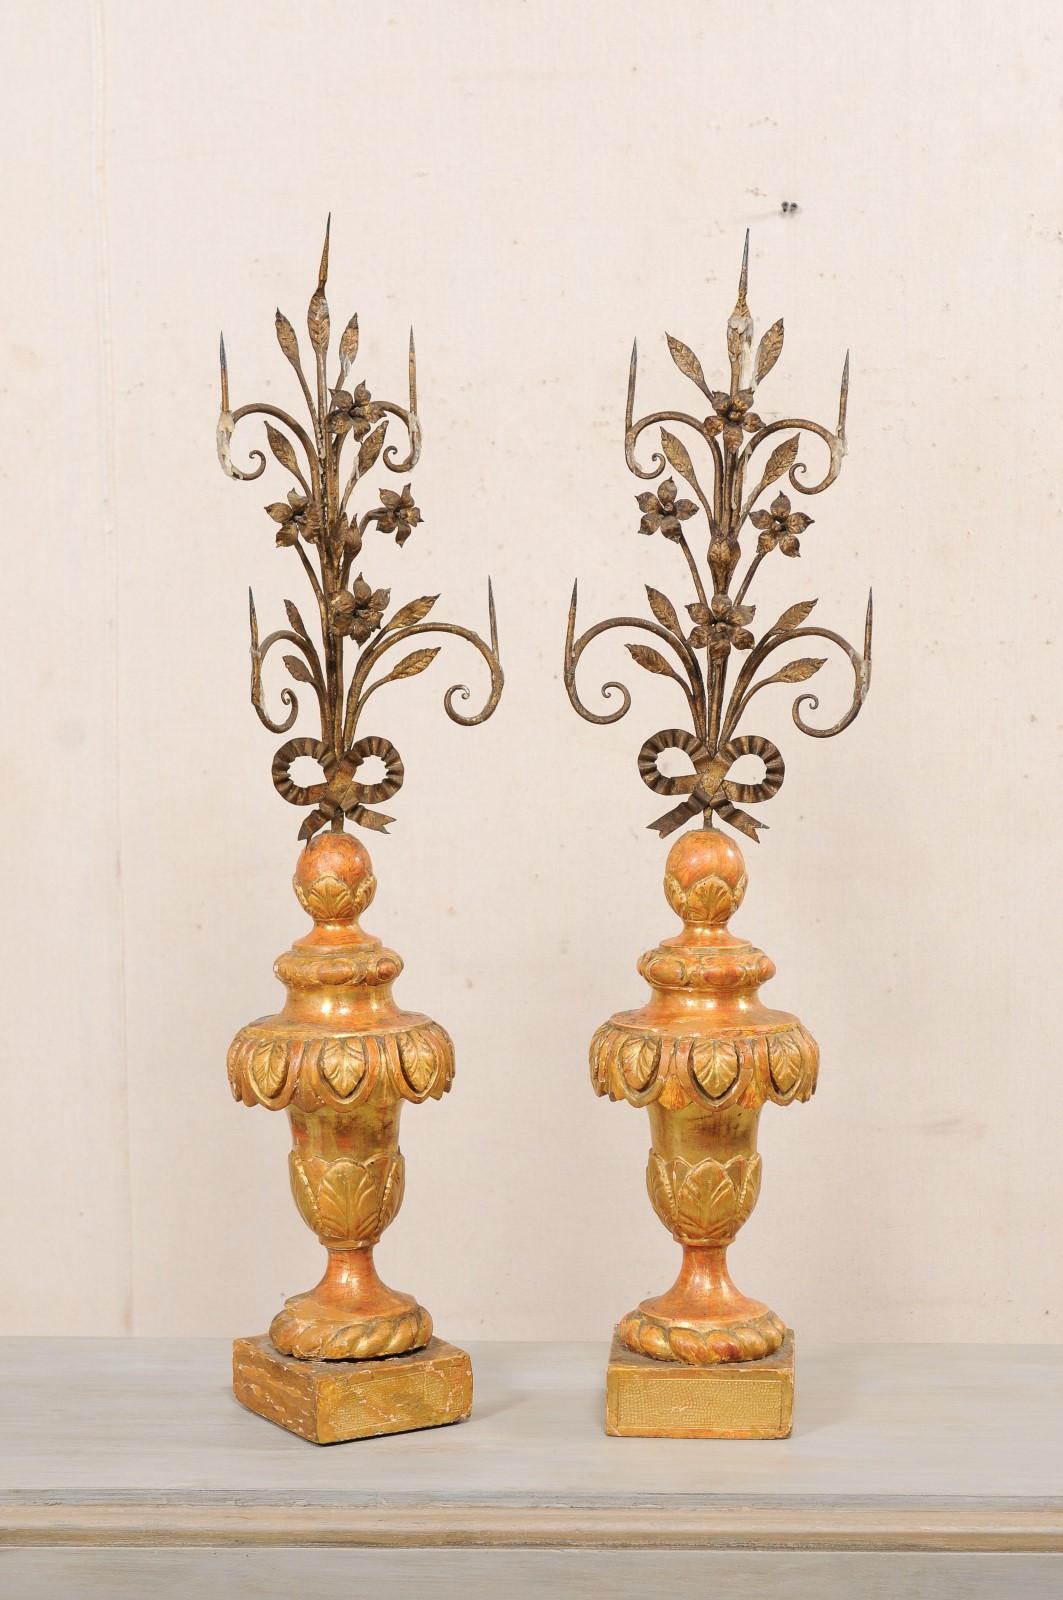 An Italian pair of hand-forged floral iron prickets on carved wood bases, with their original painted finish, from the early 19th century. This antique large pair of prickets from Italy each feature beautiful forged and gilded iron shaped with